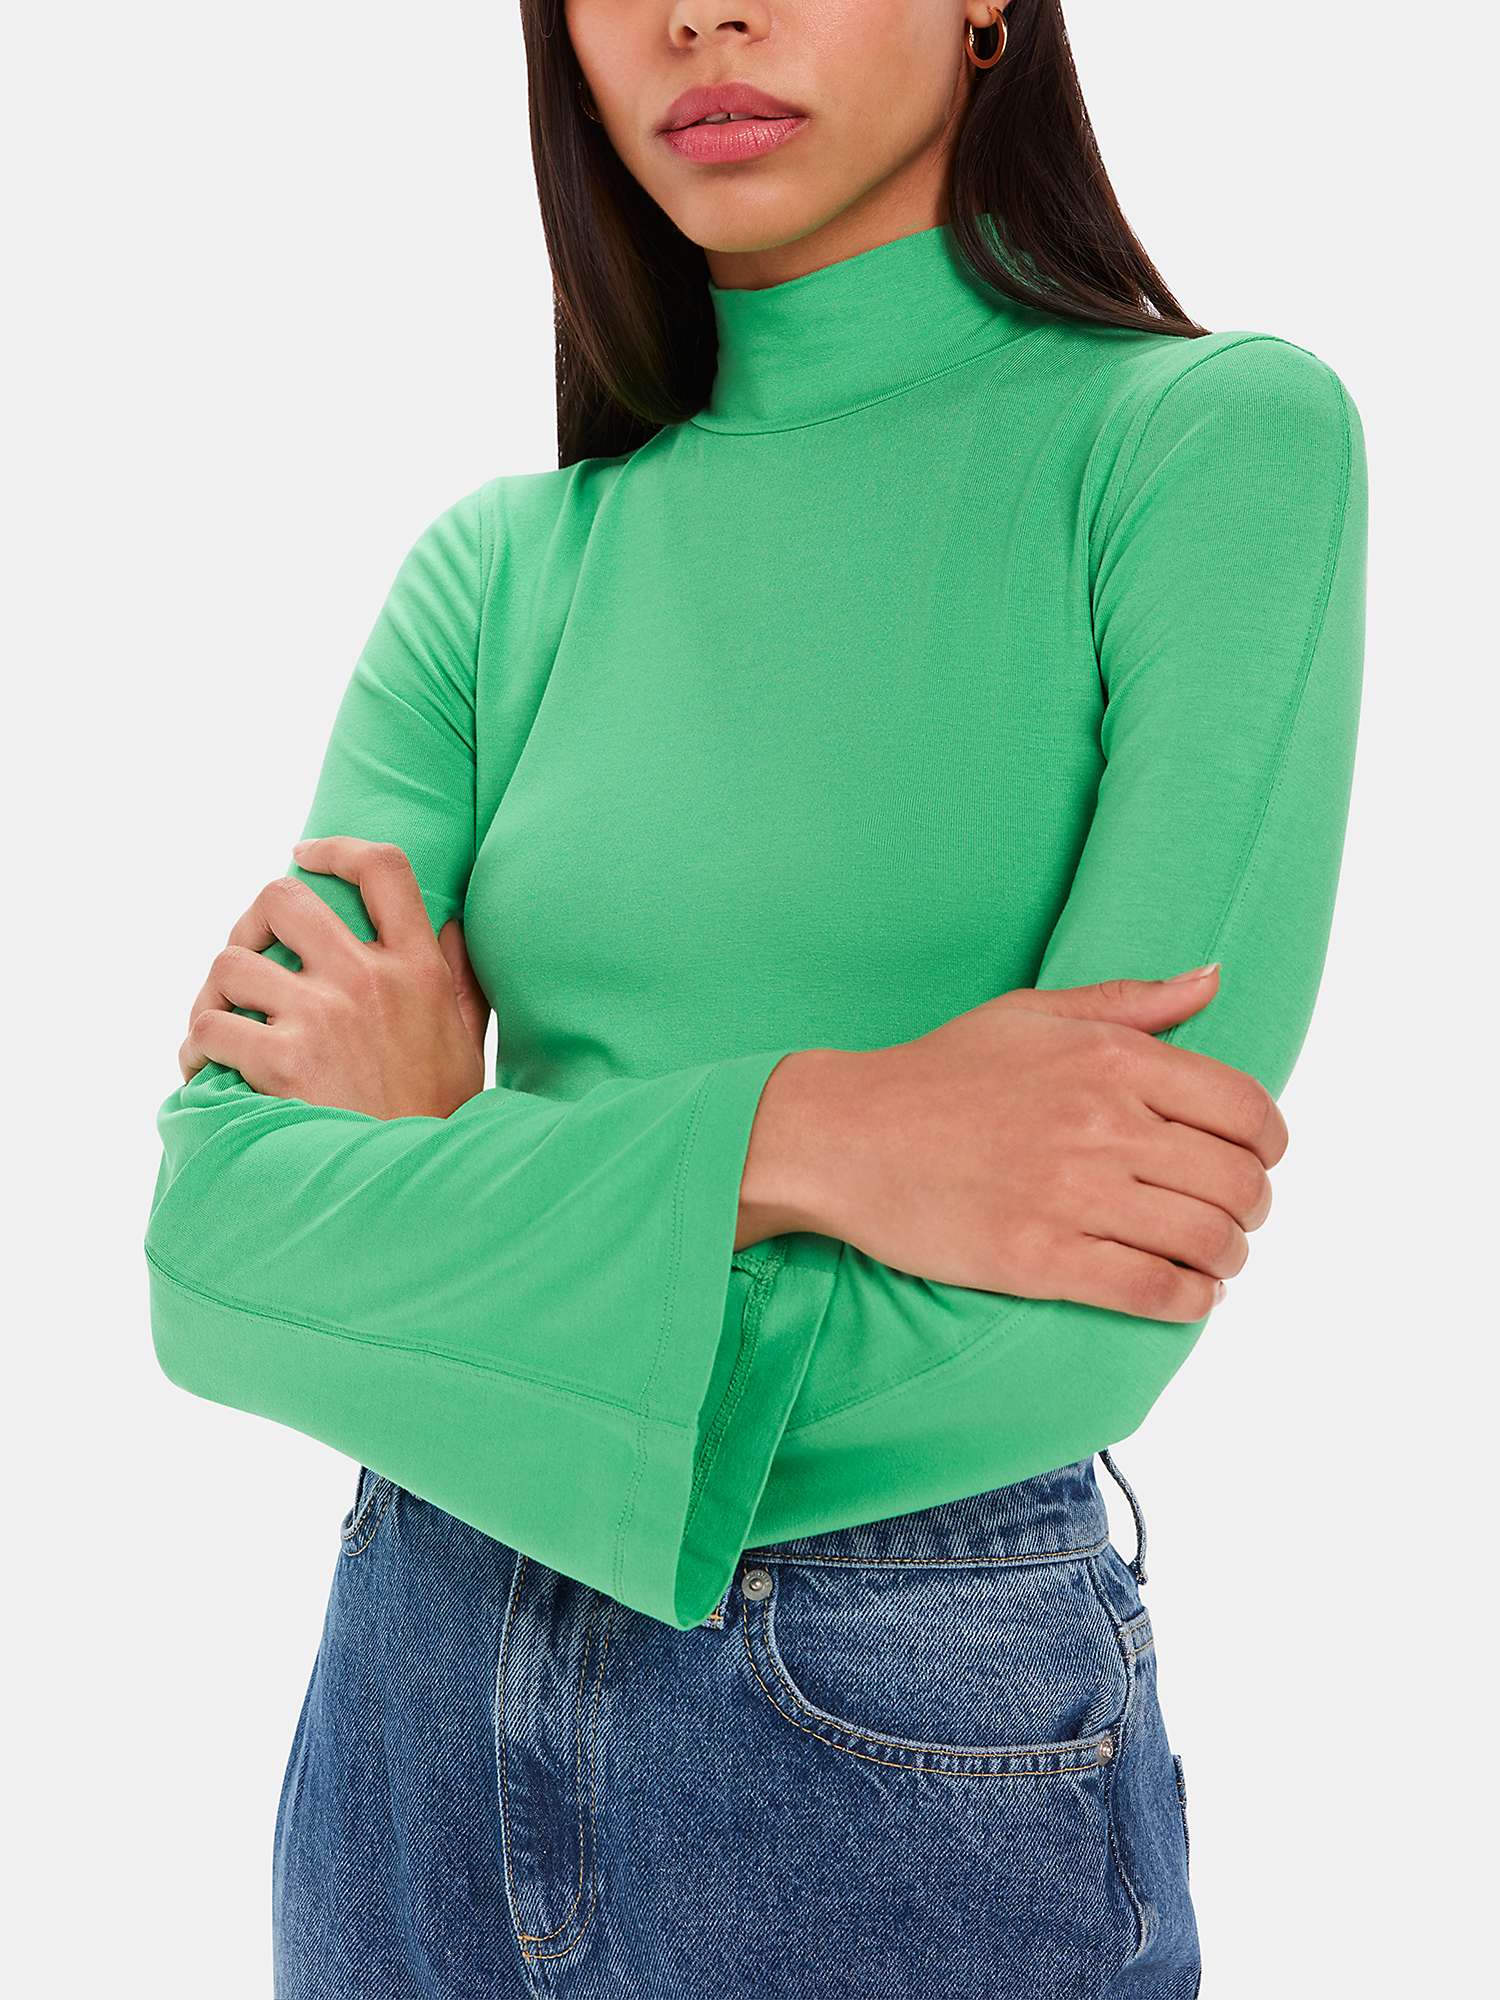 Buy Whistles Wide Sleeve High Neck Top Online at johnlewis.com